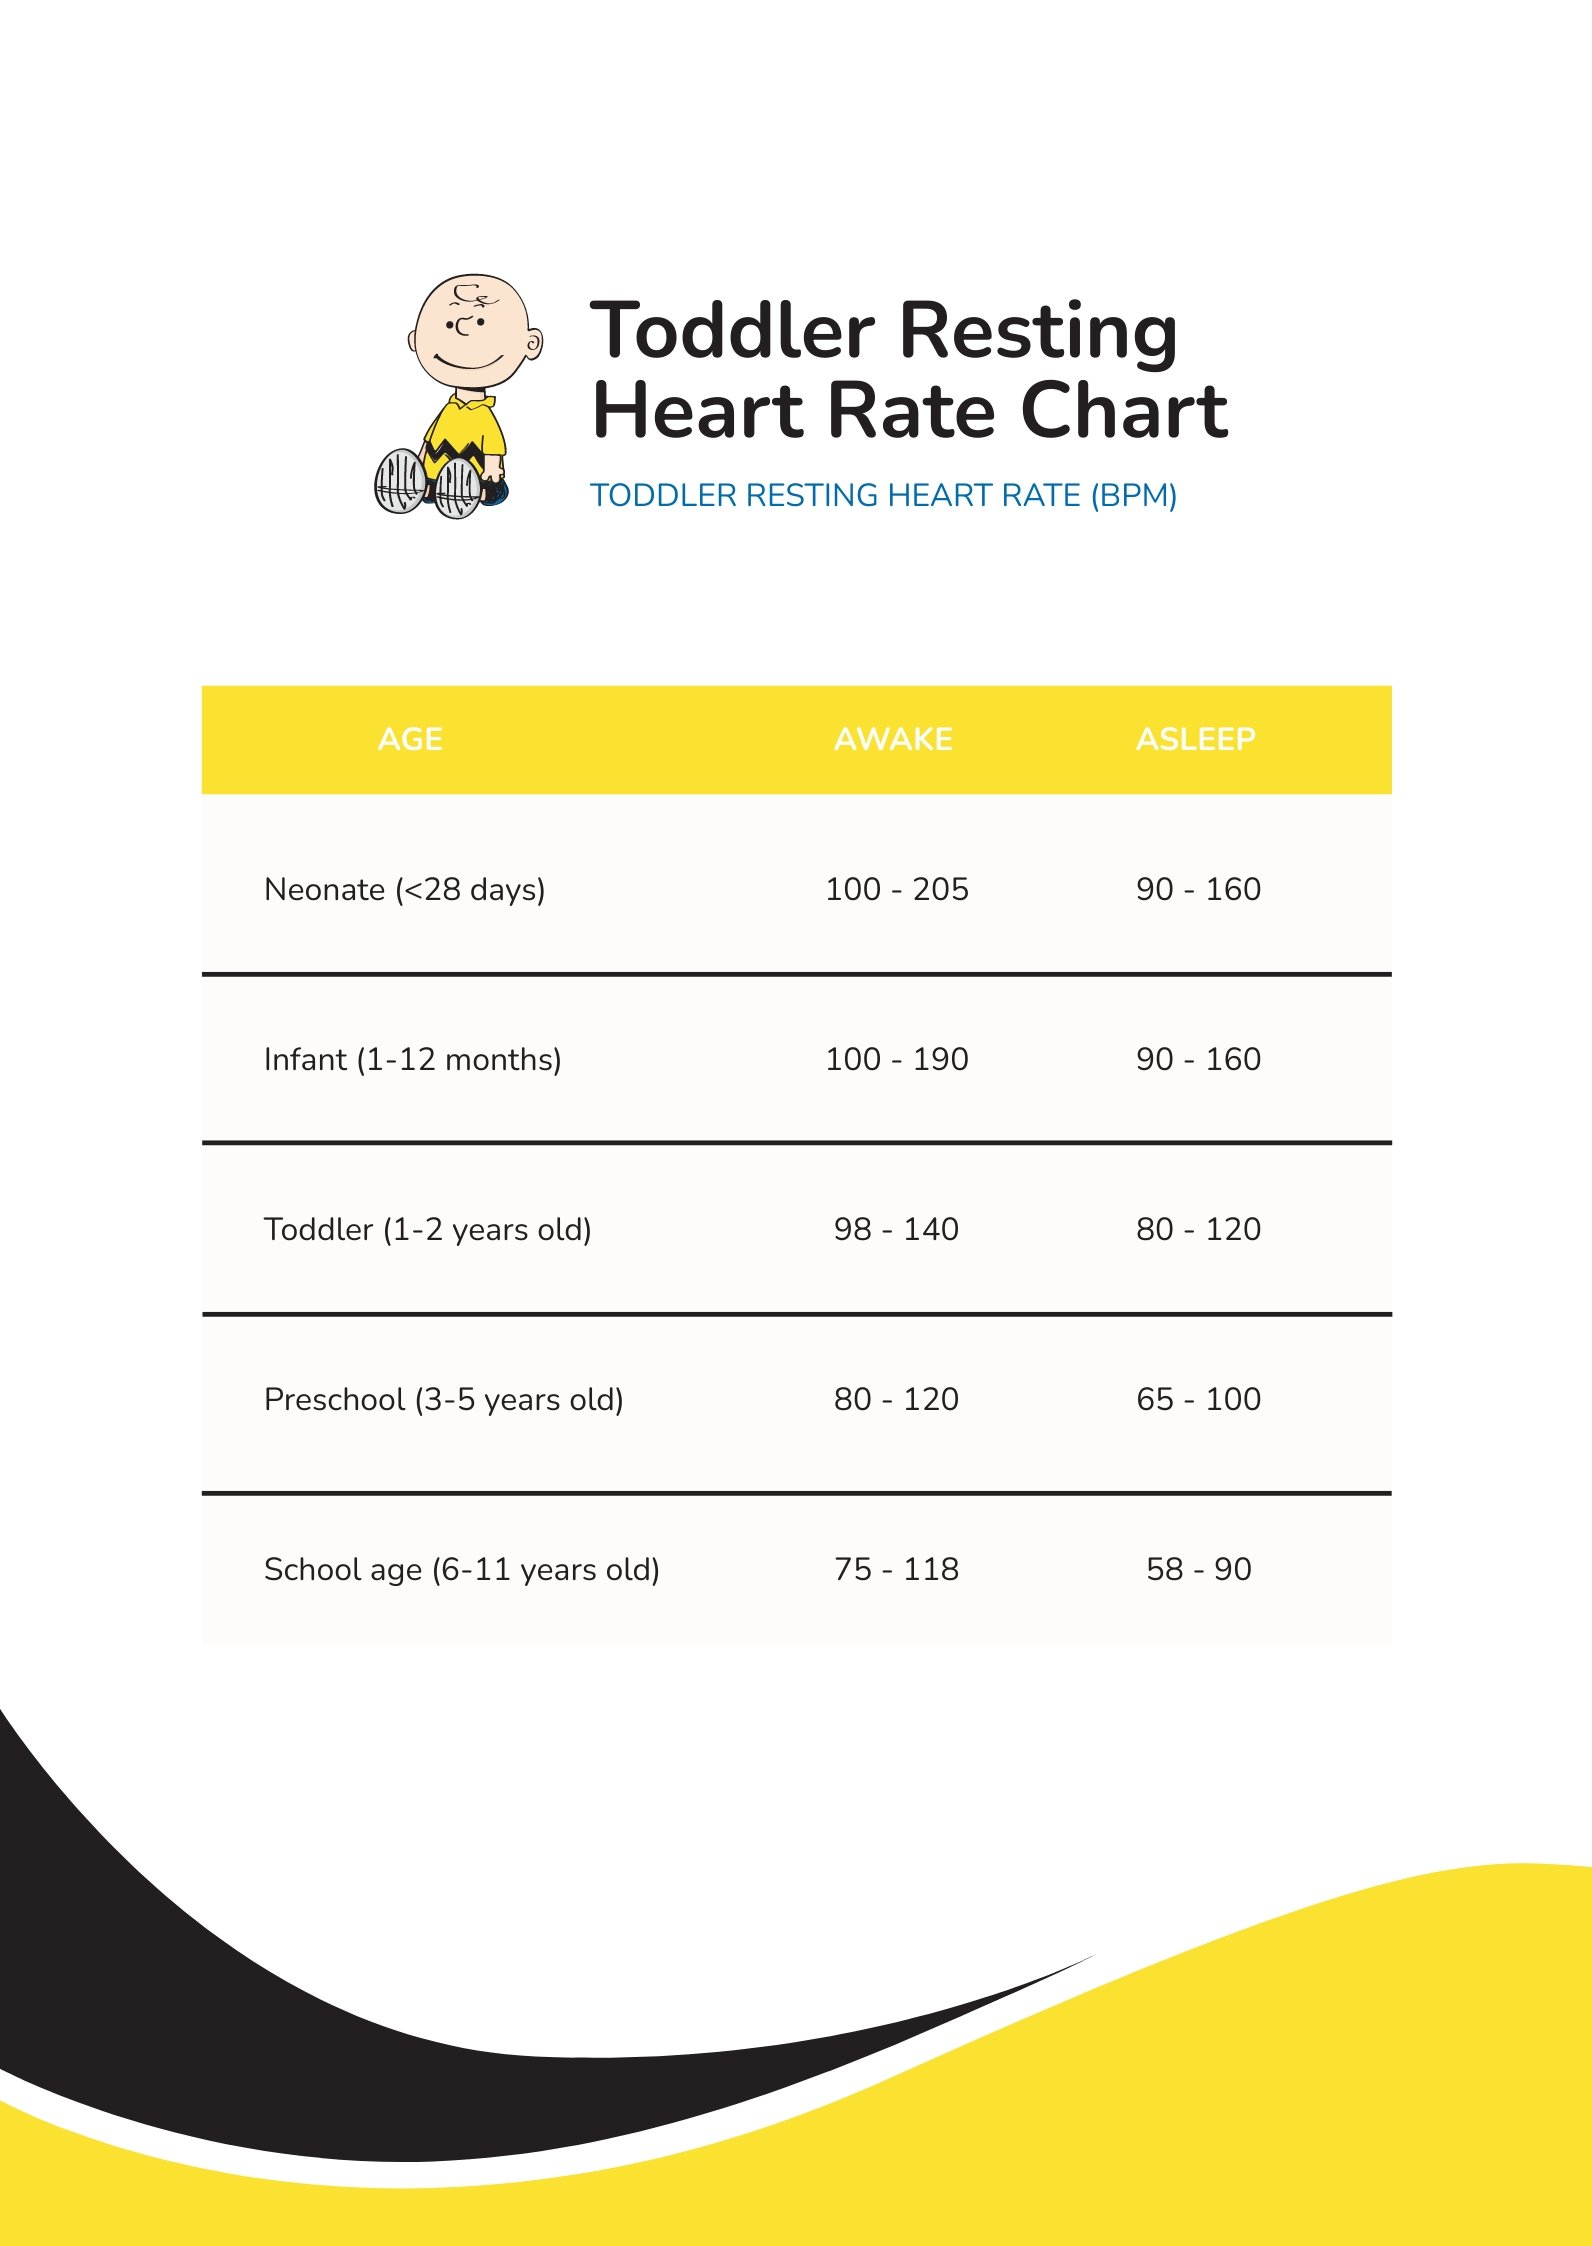 Toddler Resting Heart Rate Chart